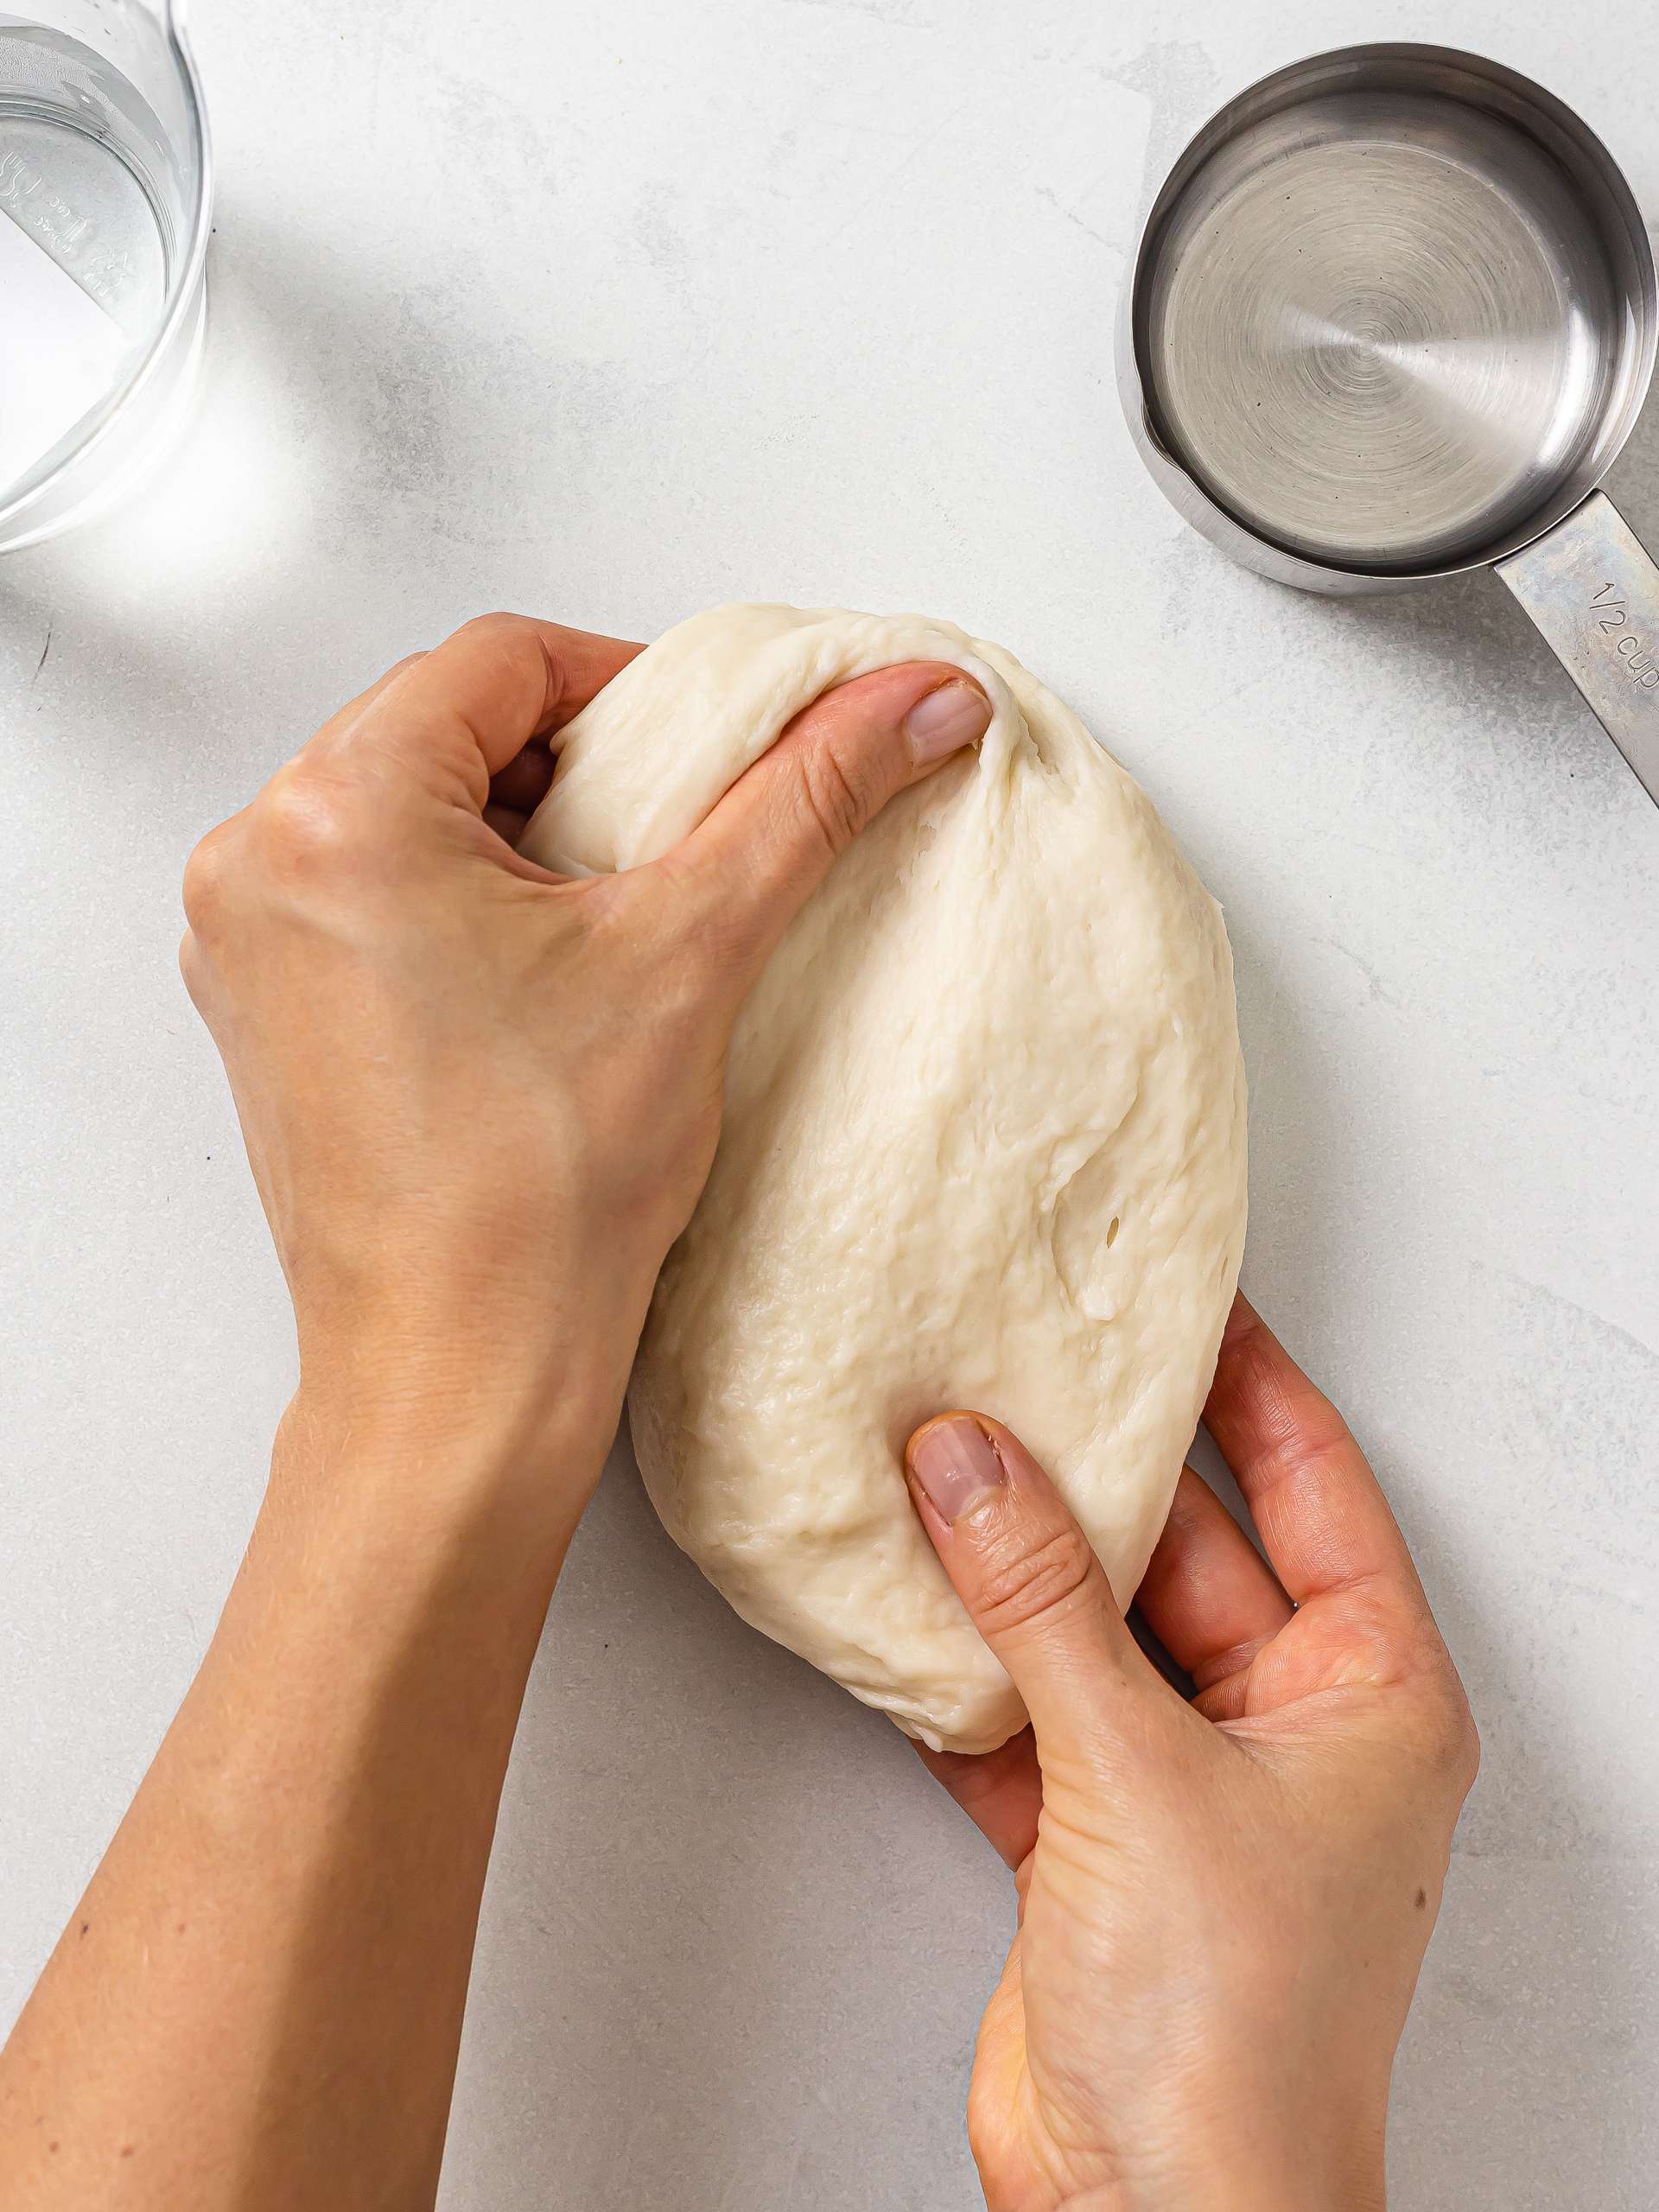 kneaded pastry dough